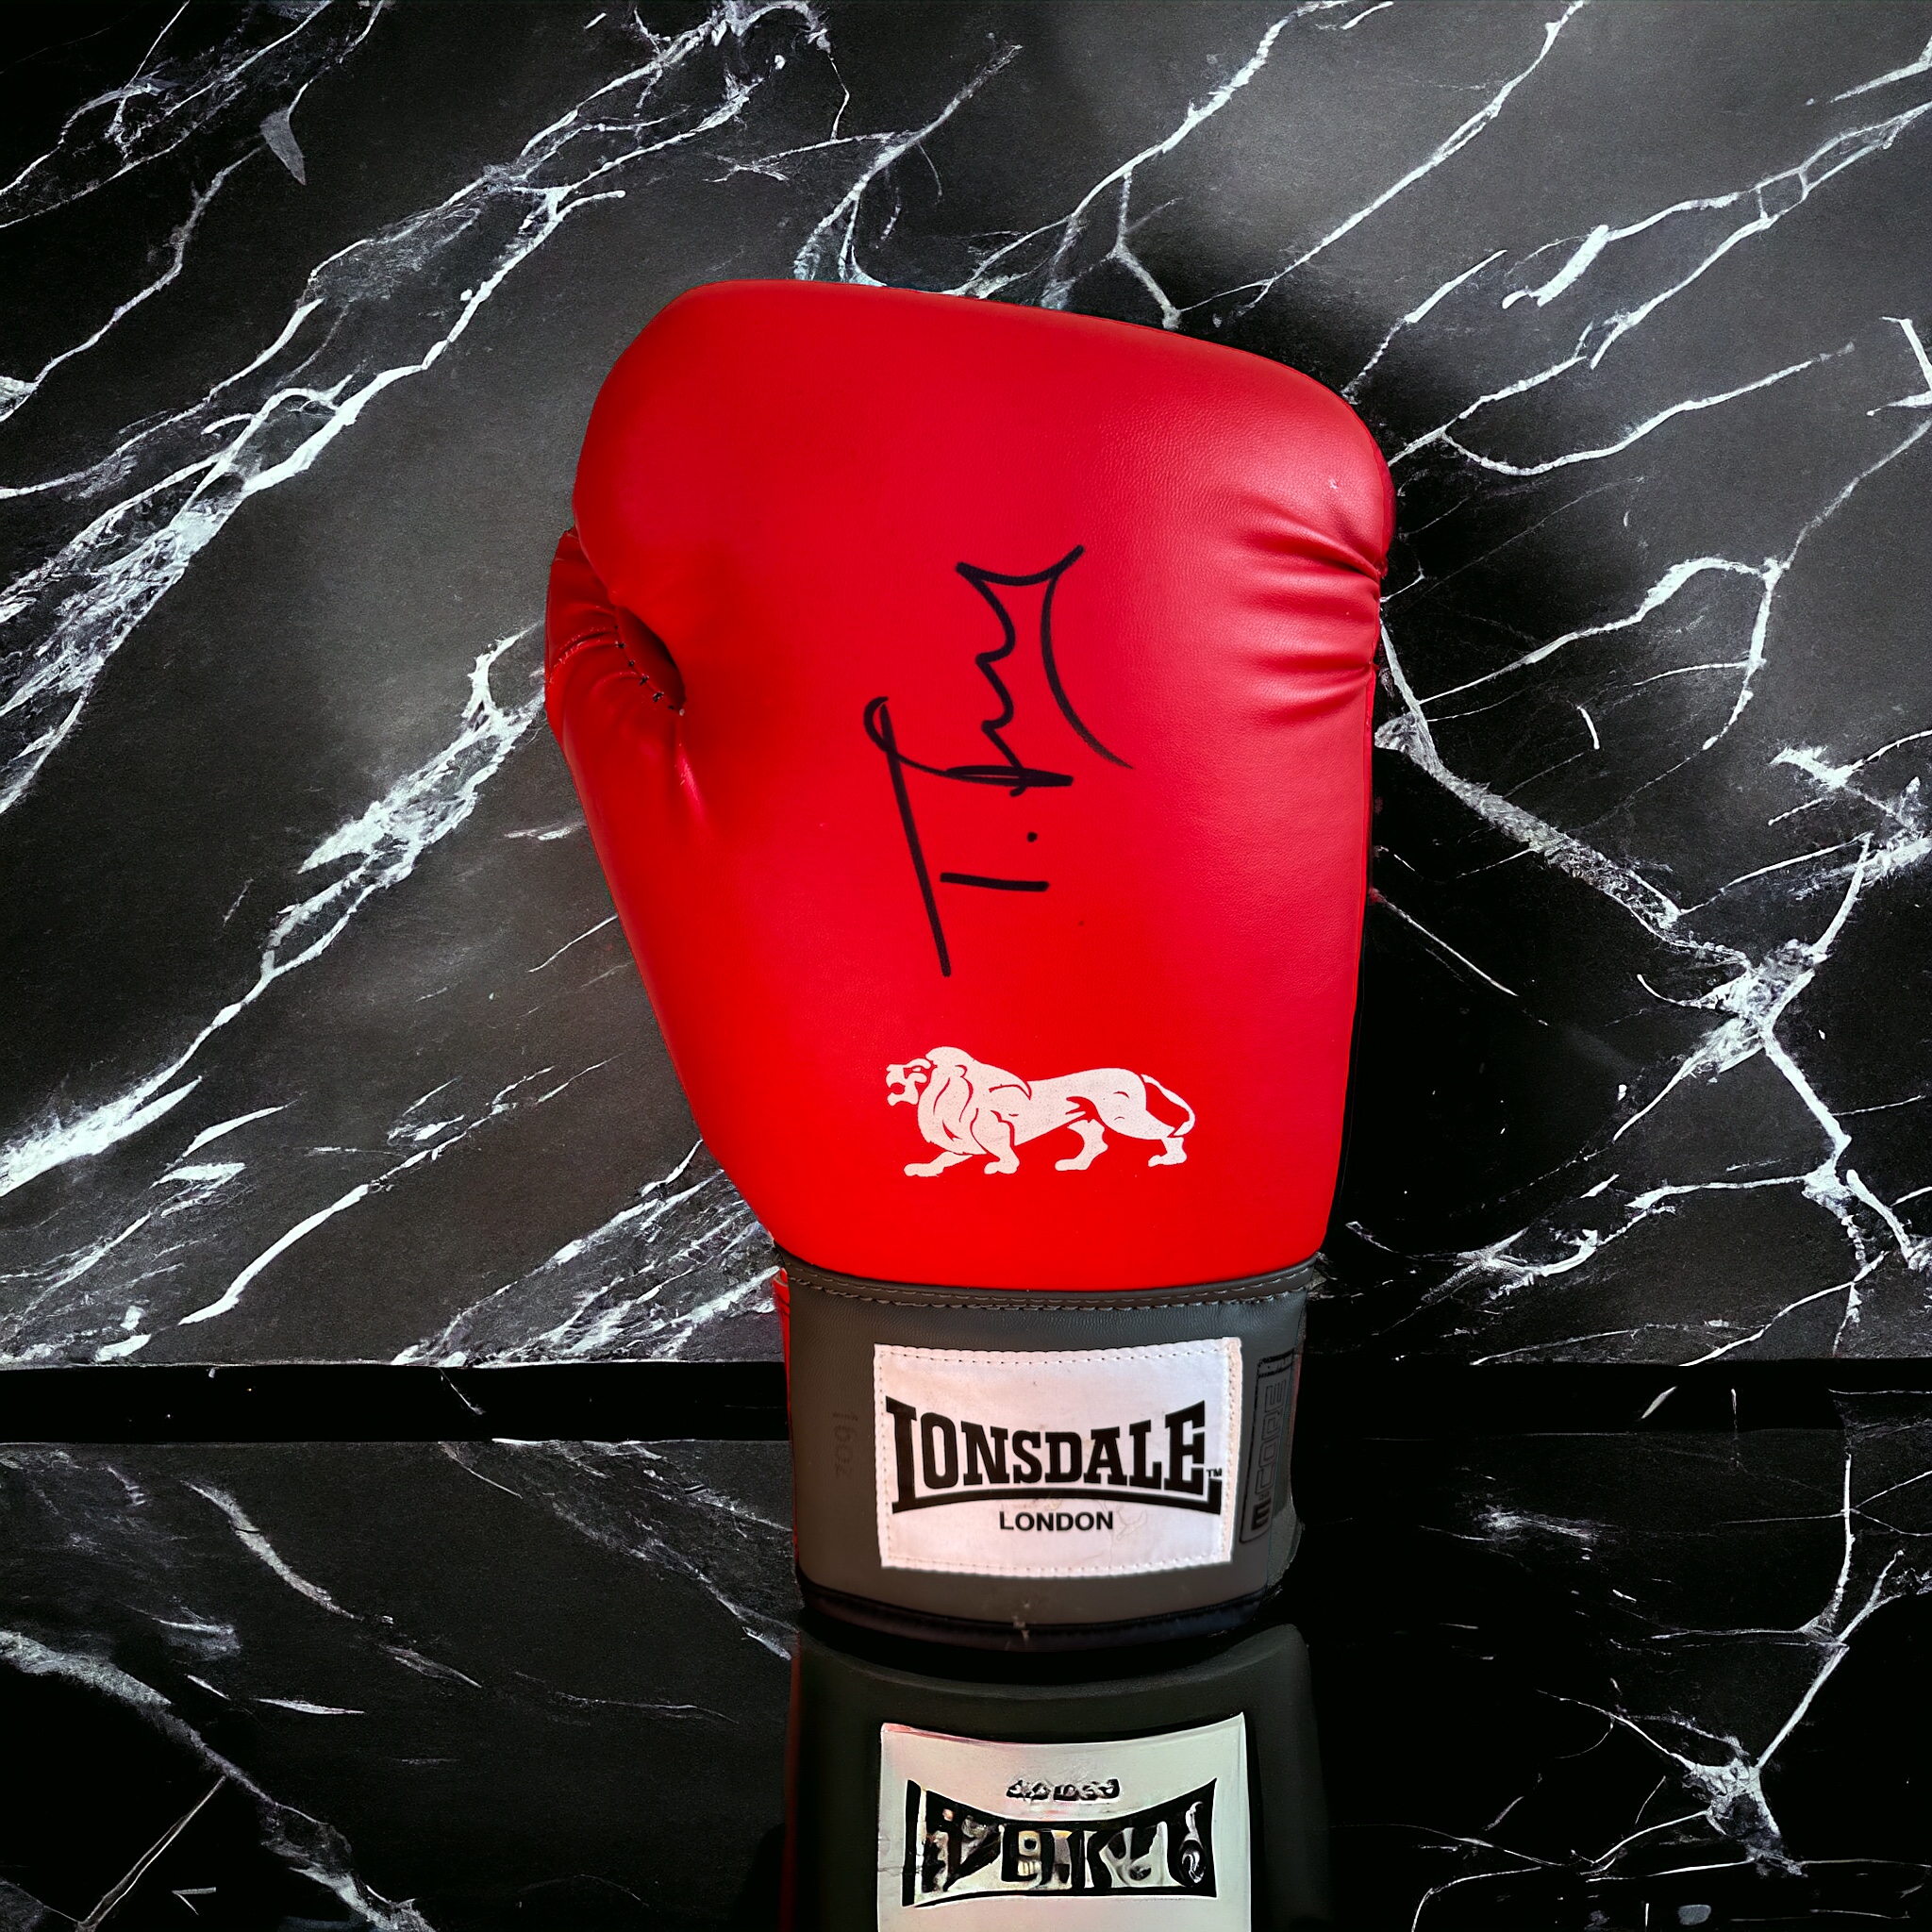 Tyson Fury signed red Lonsdale boxing glove. Good condition. All autographs come with a